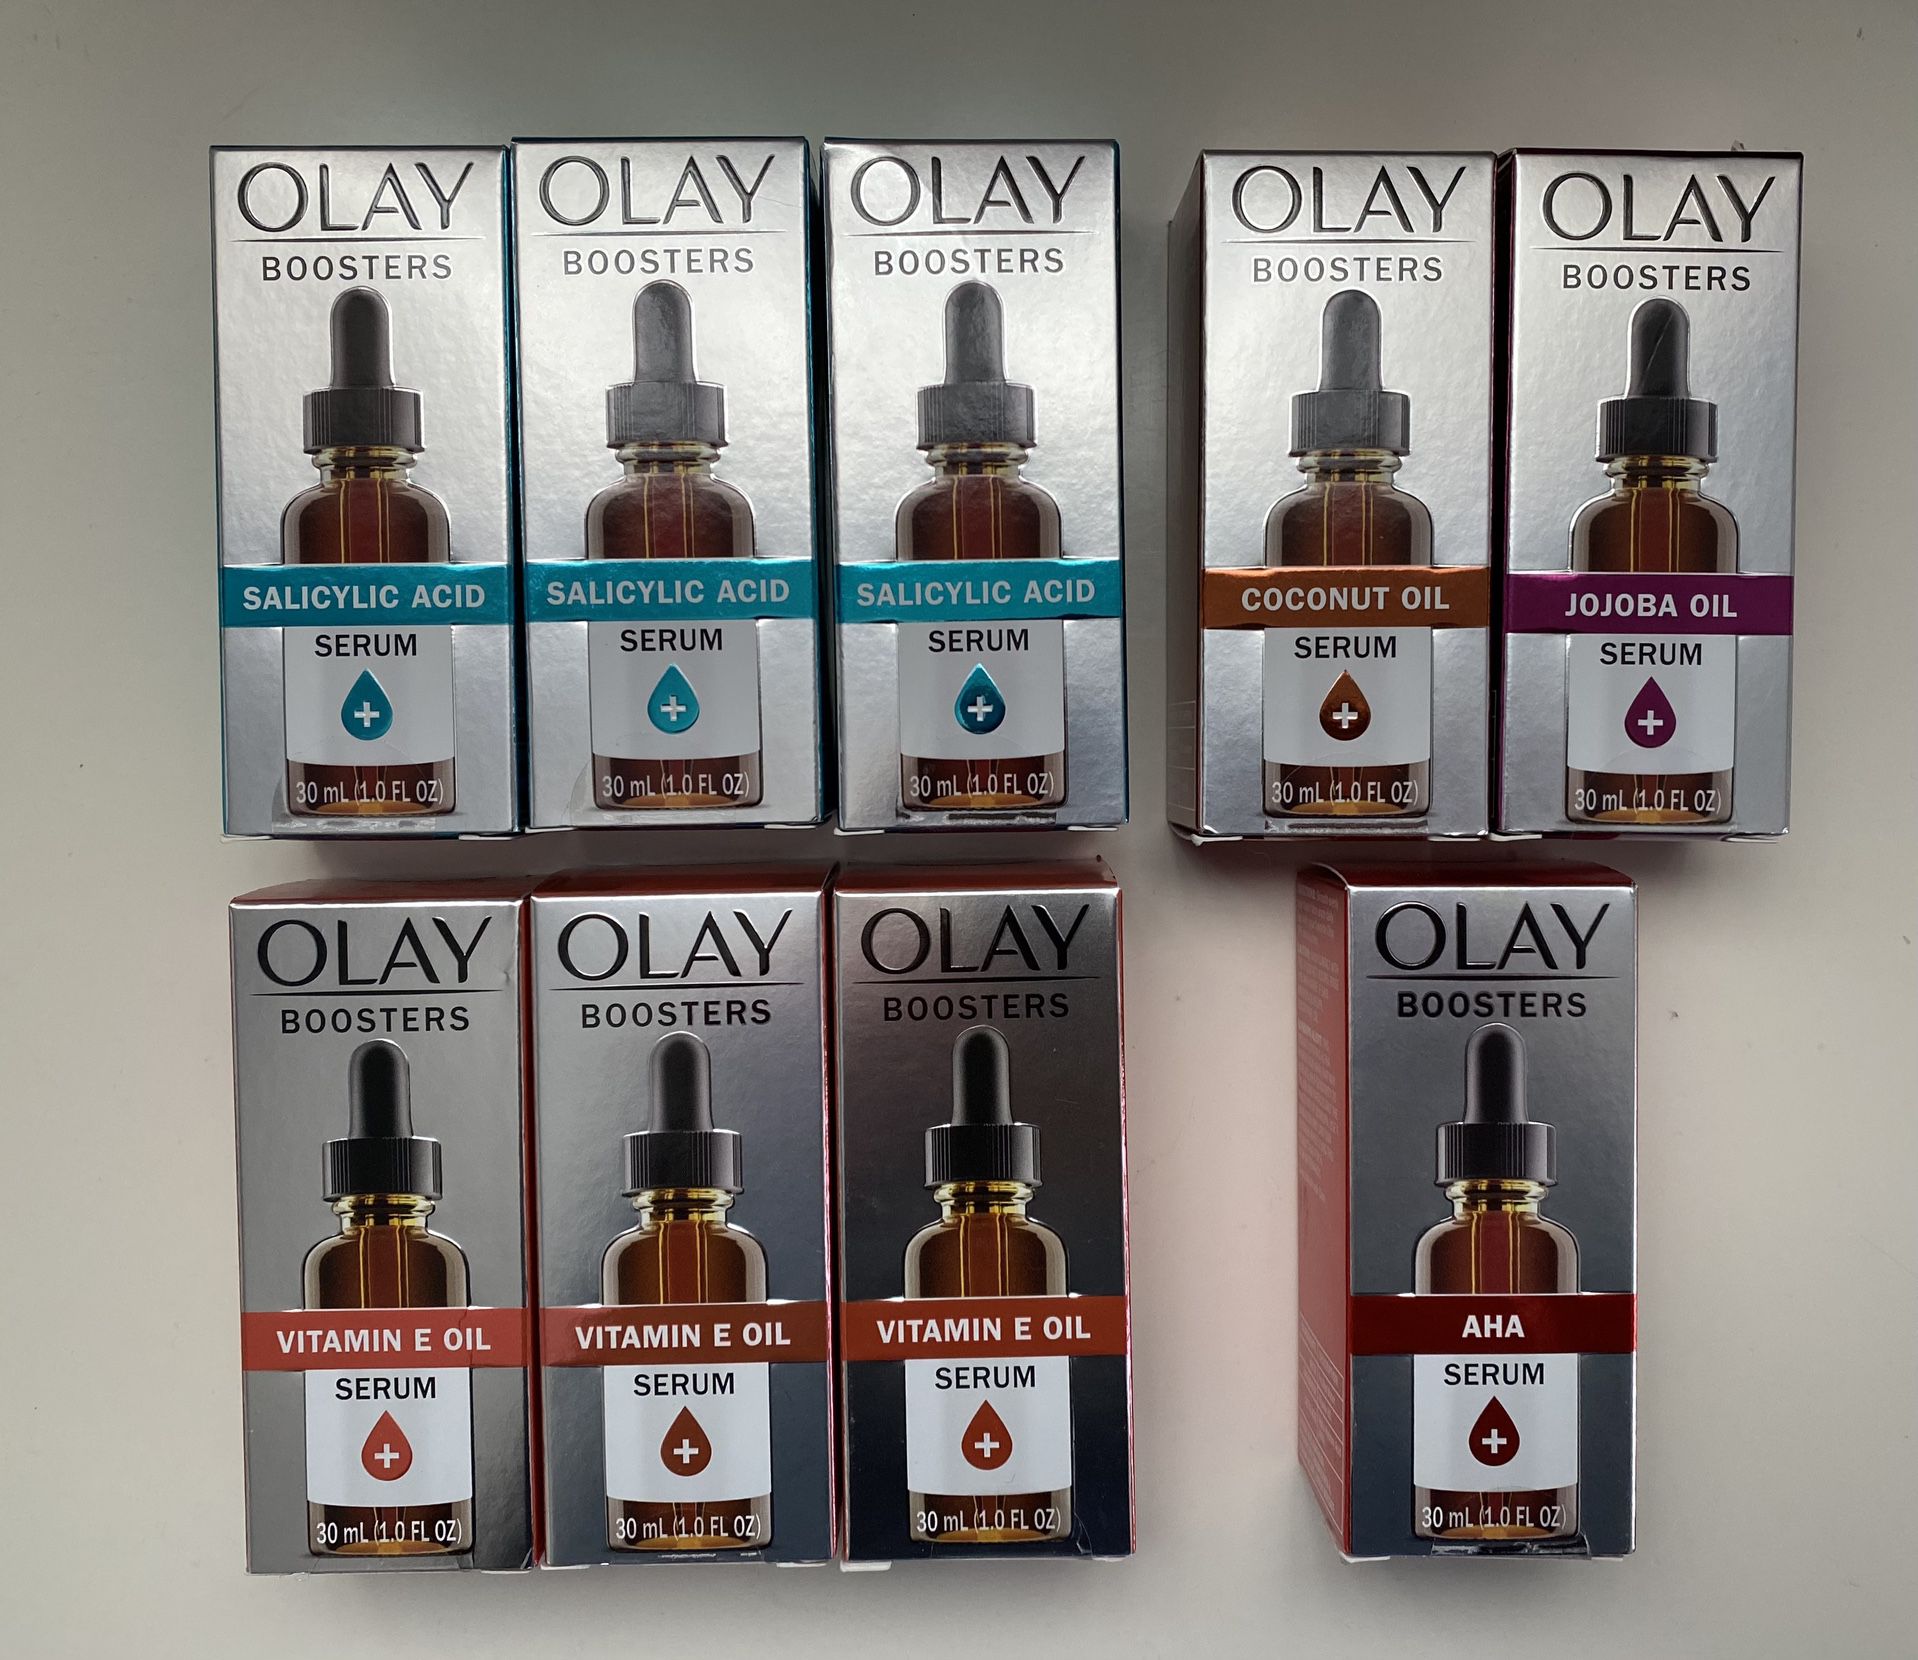 Olay facial boosters - serums